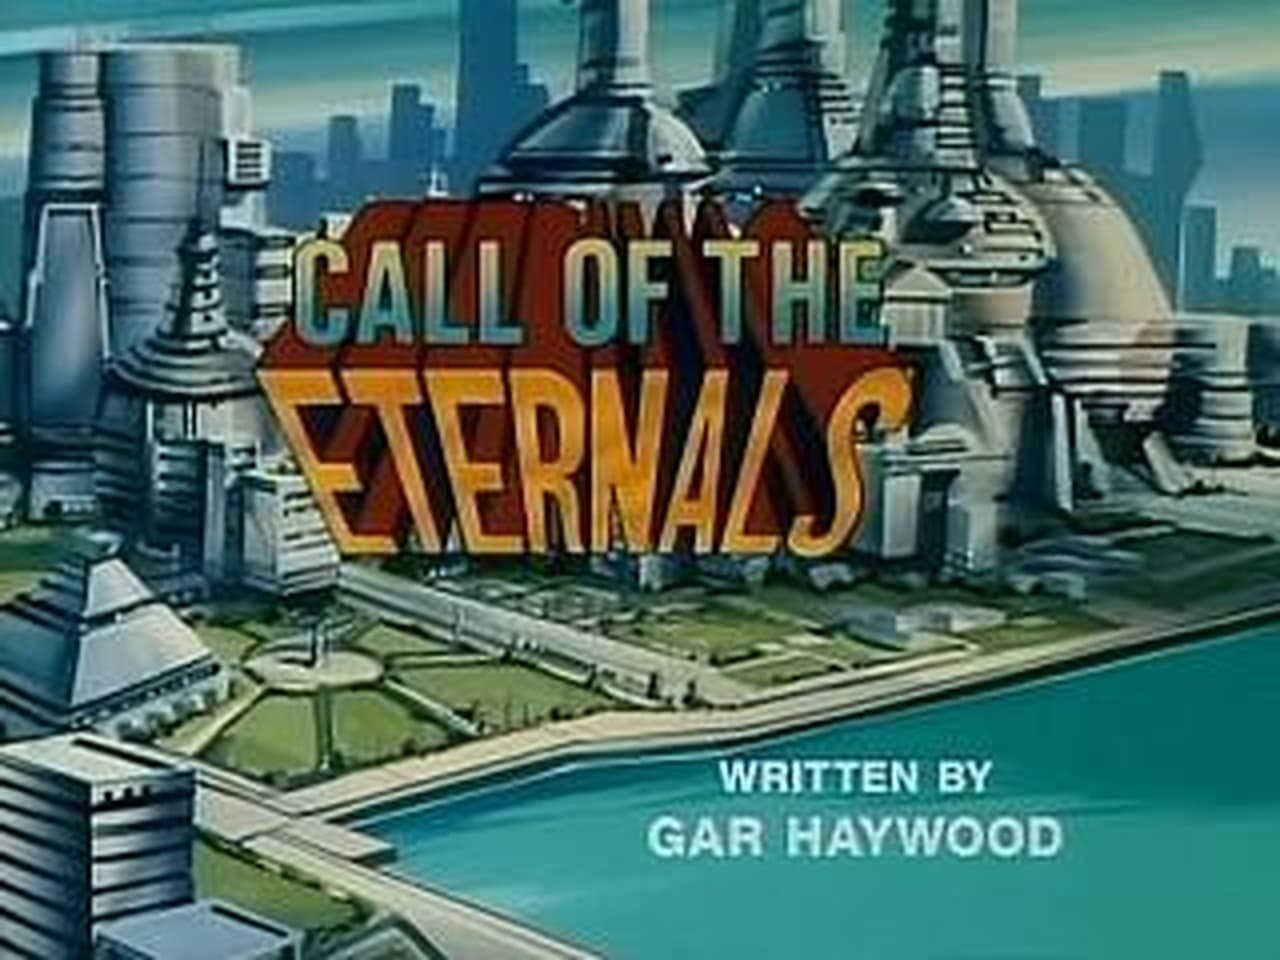 Call of the Eternals